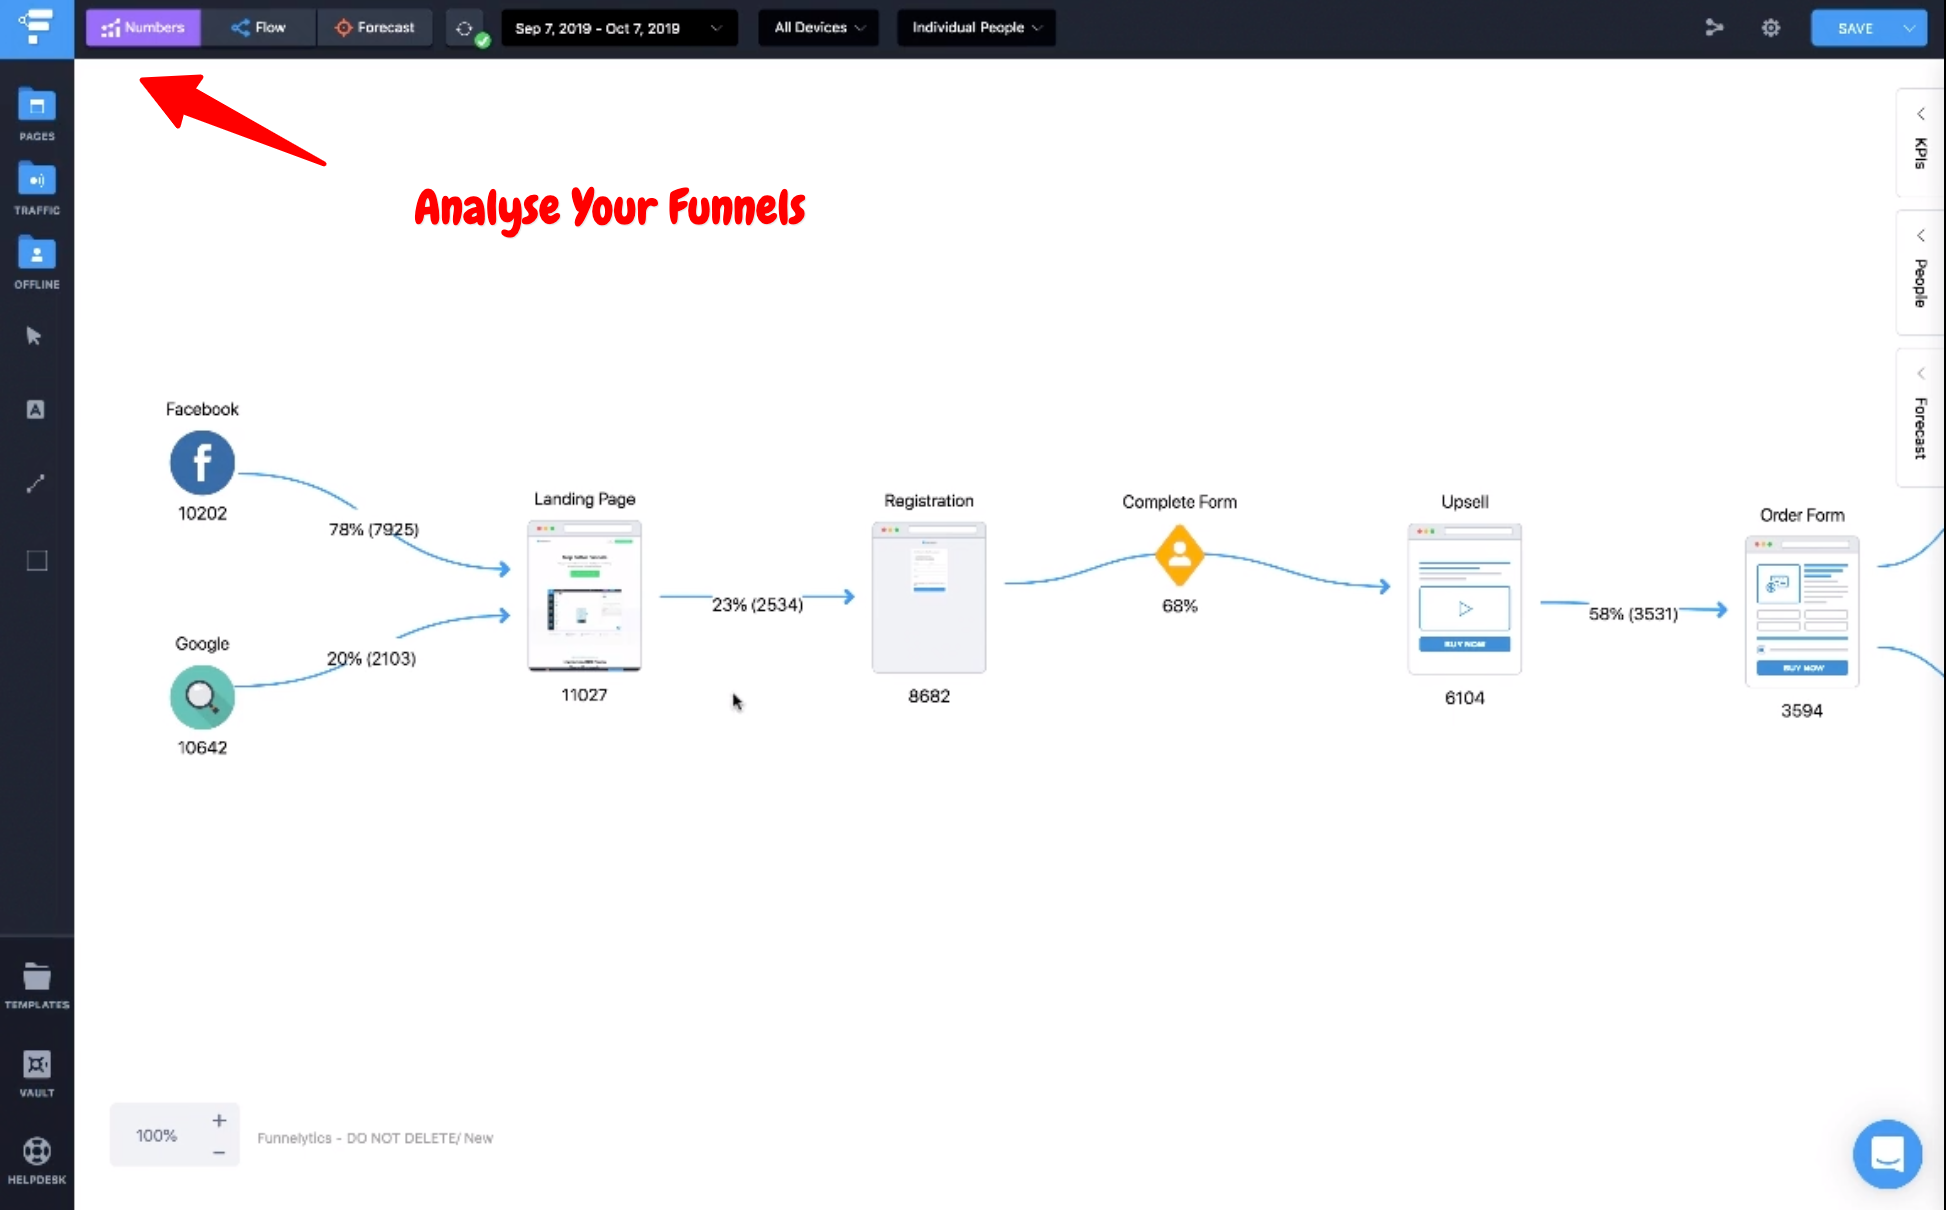 Funnelytics Review- Analyse Your Funnels